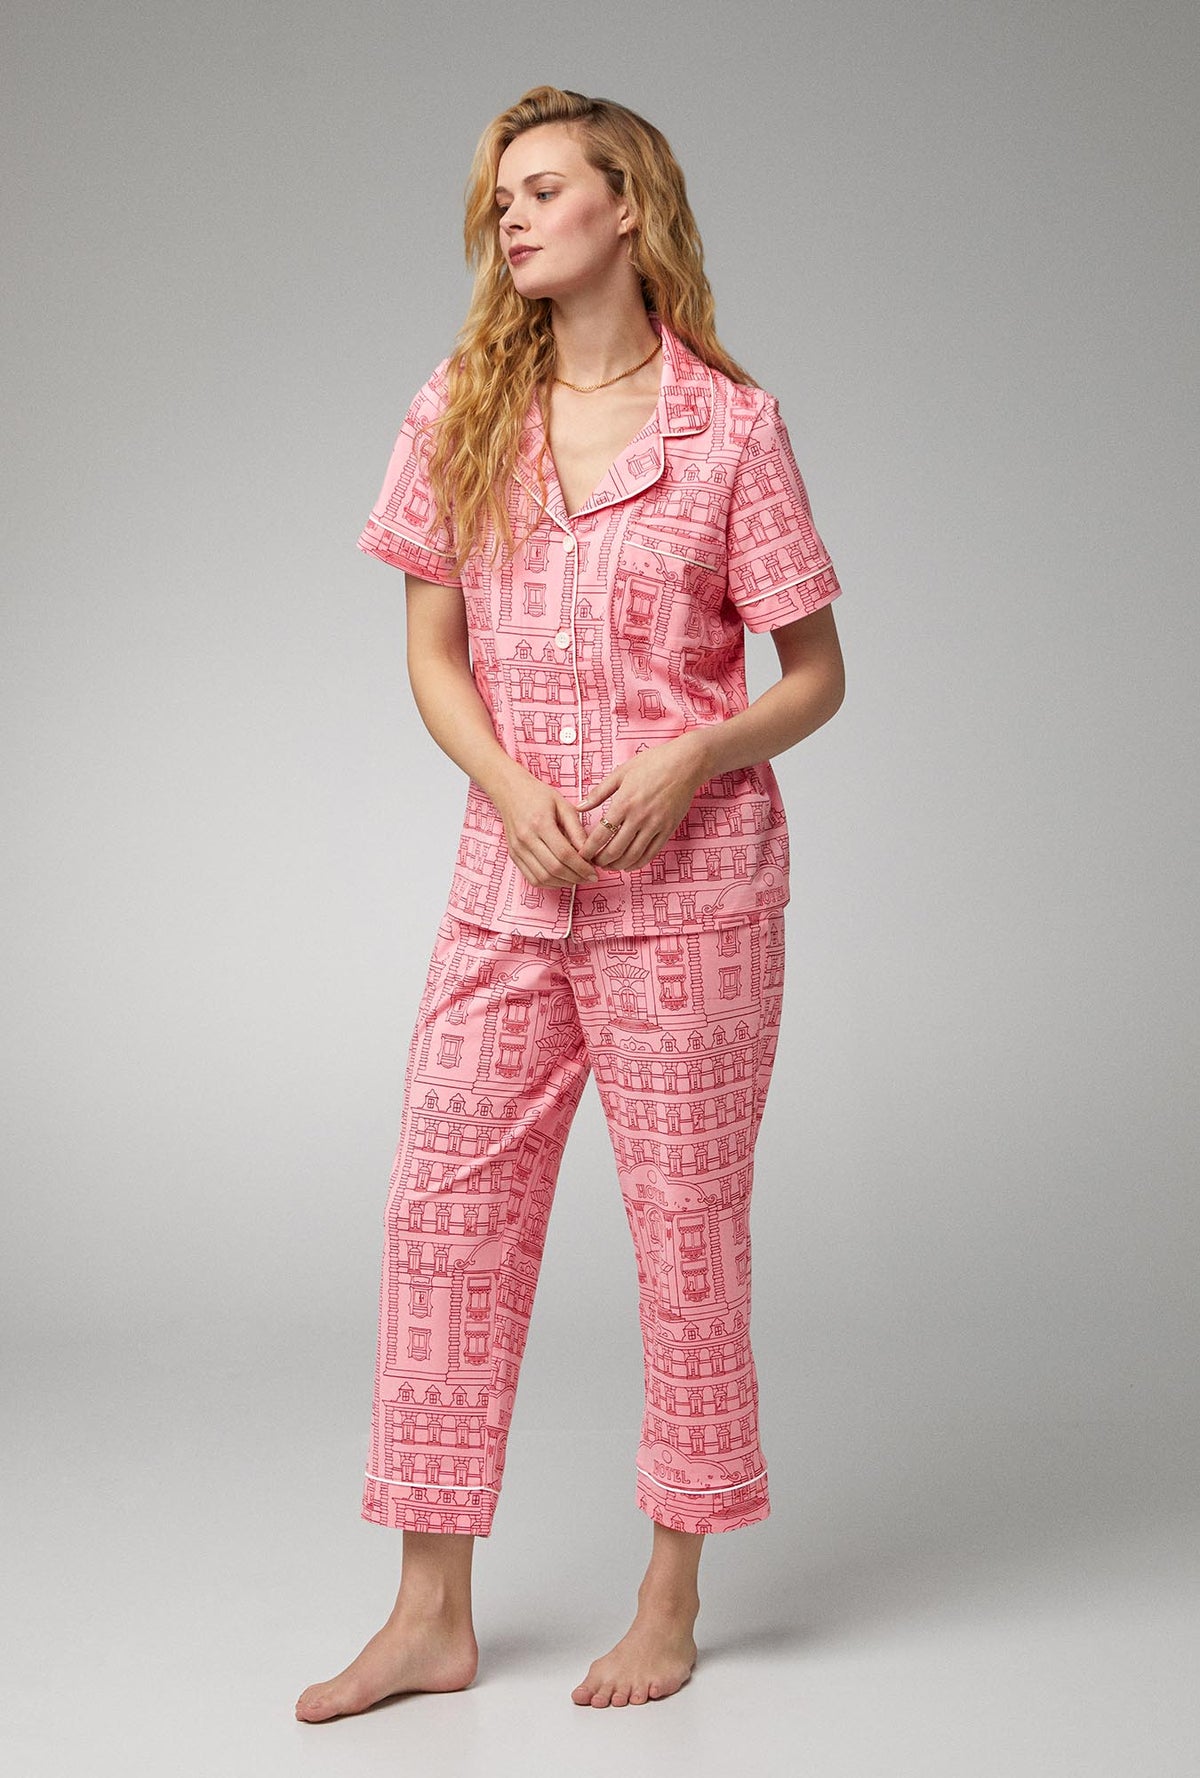 A lady wearing short sleeve classic stretch jersey cropped pj set with grand hotel print